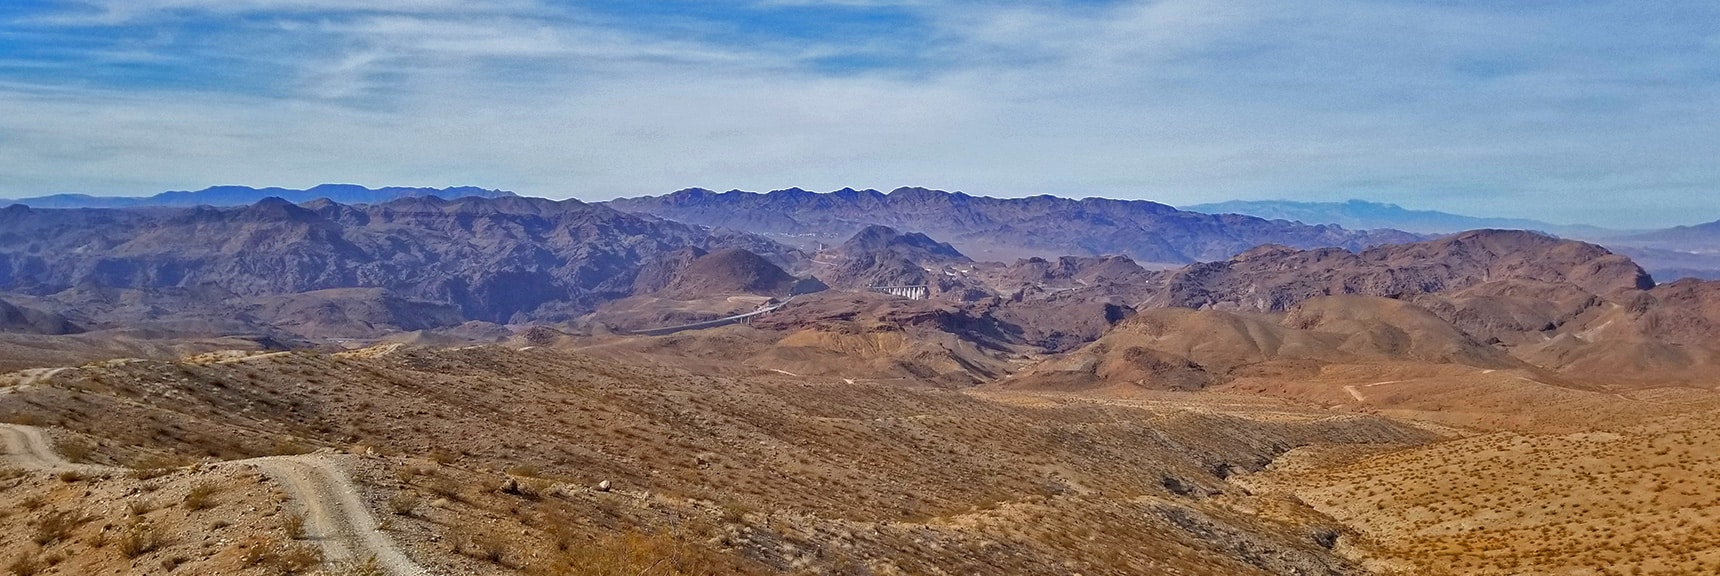 Hoover Dam Area Viewed from High Point on North Mine Access Road | Kingman Wash Access Road | Lake Mead National Recreation Area, Arizona